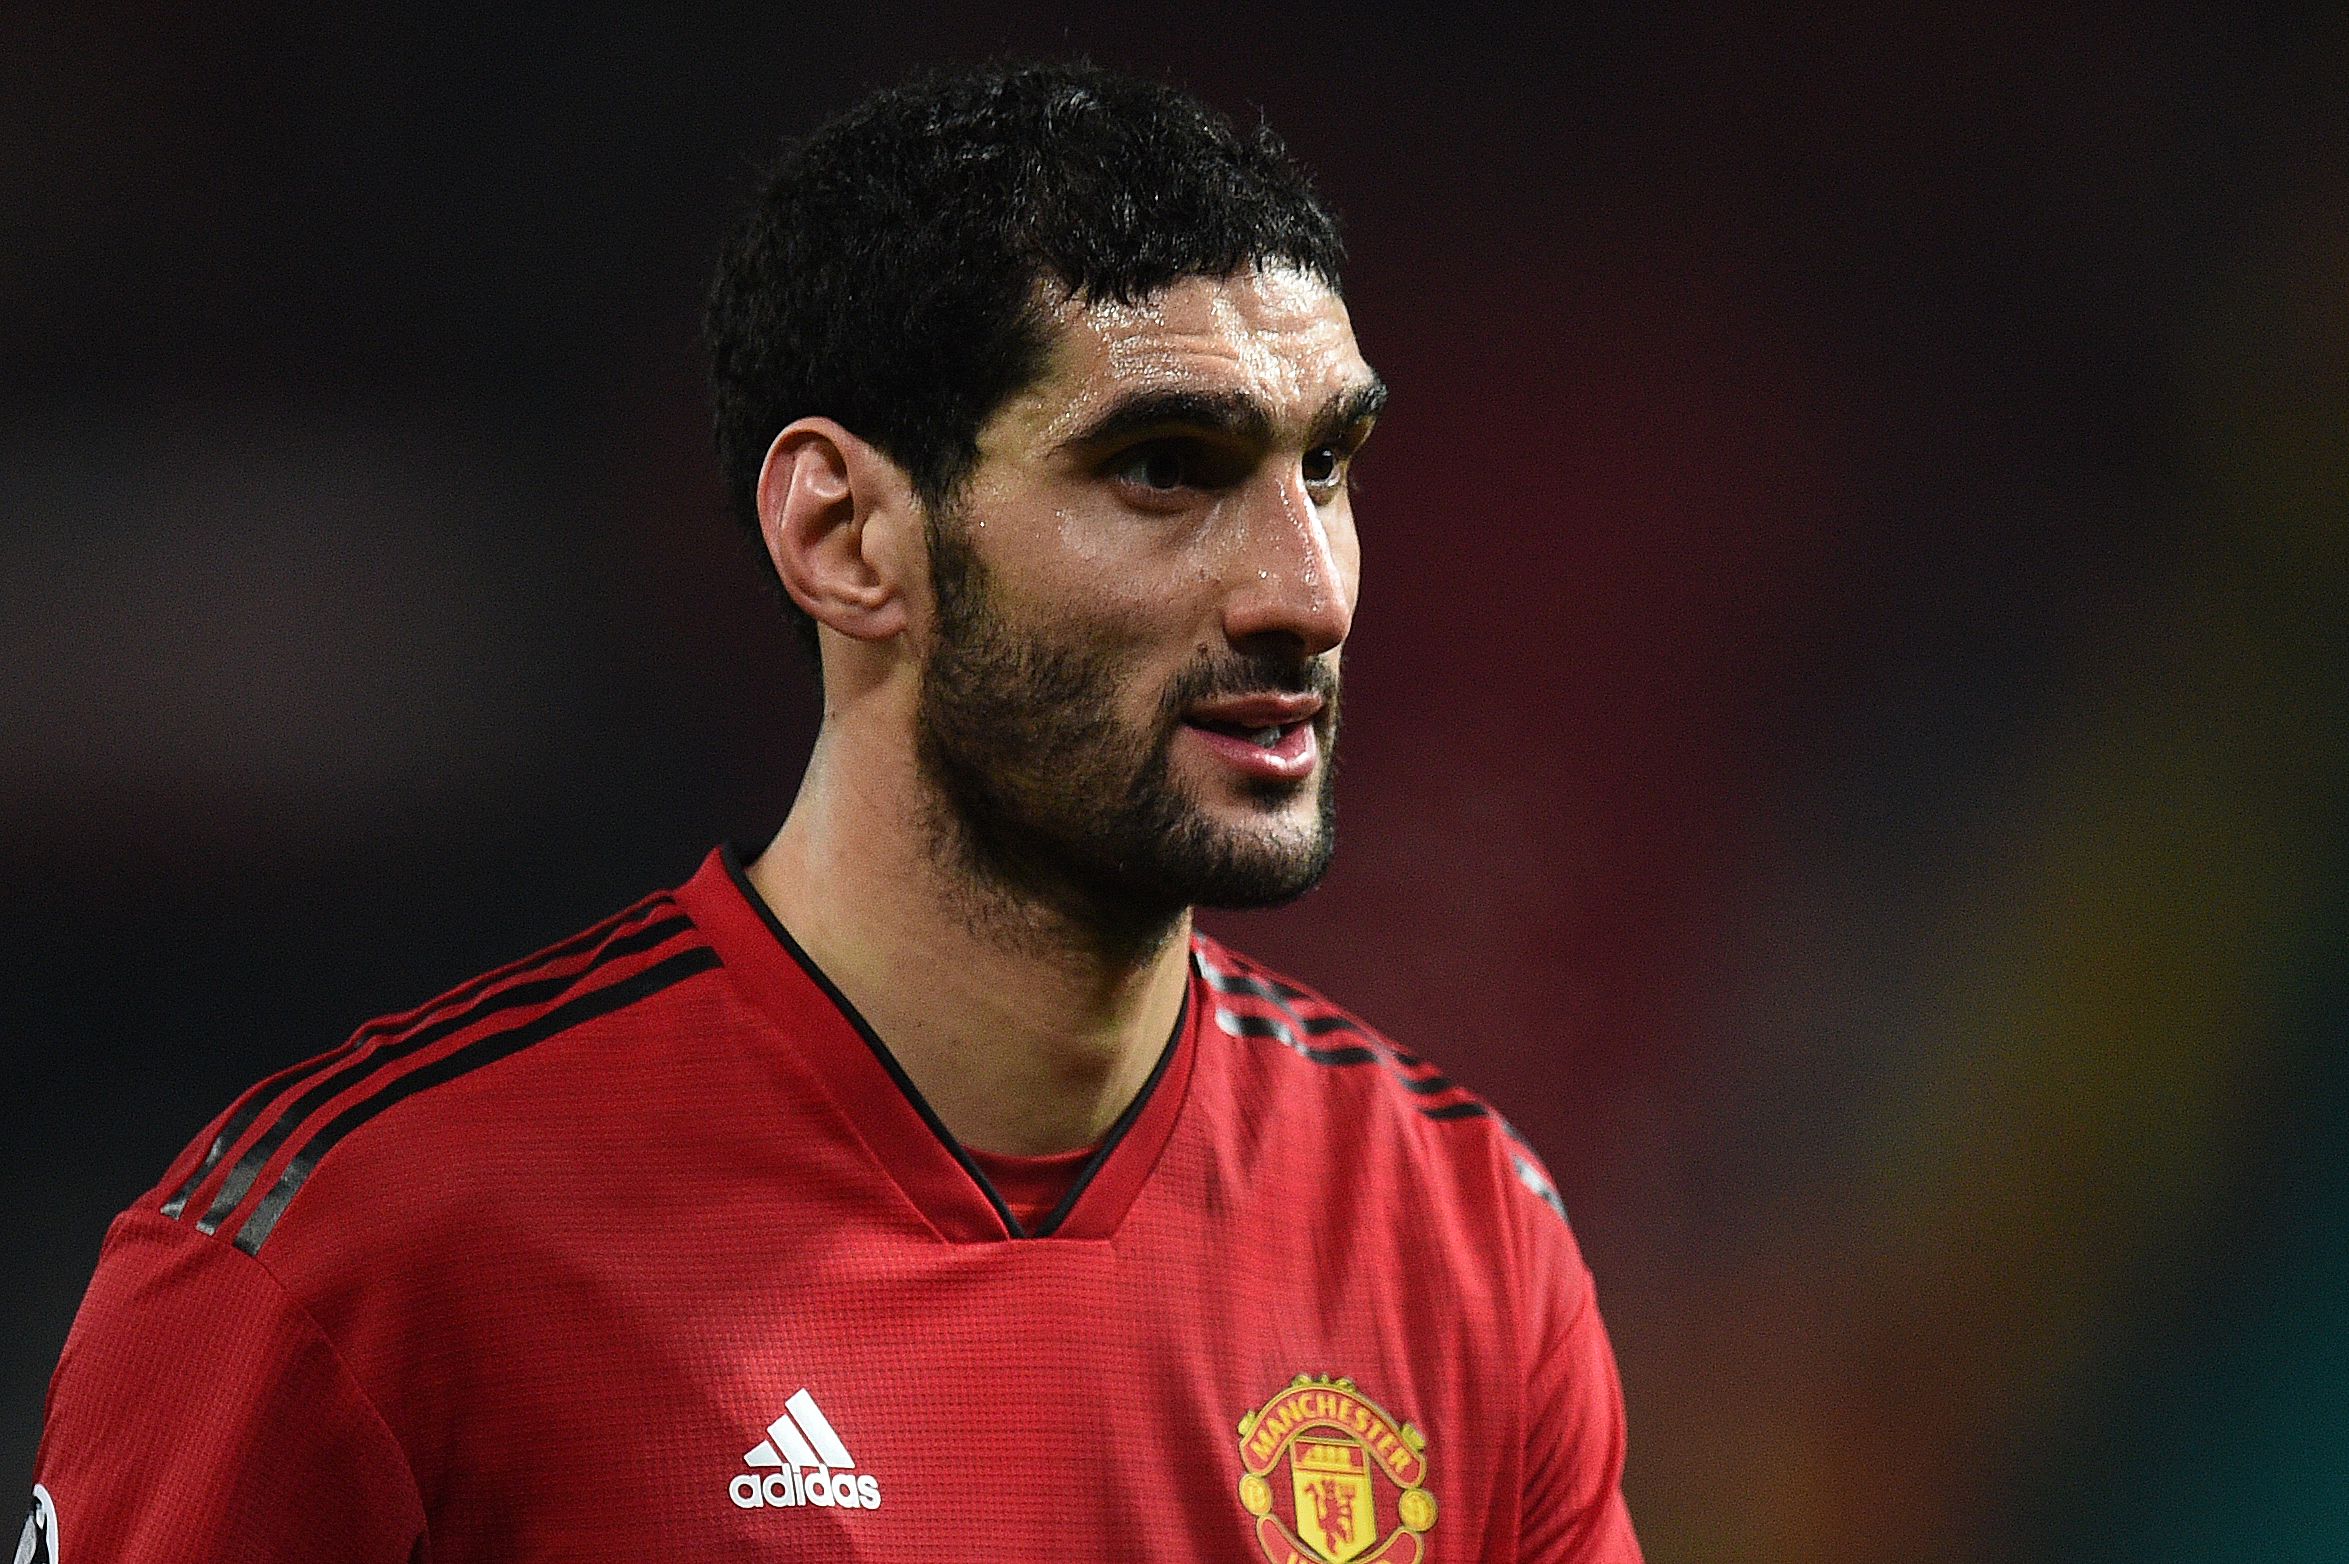 Manchester United's Belgian midfielder Marouane Fellaini leaves the pitch following the UEFA Champions League group H football match between Manchester United and Young Boys at Old Trafford in Manchester, north-west England on November 27, 2018. (Photo by Oli SCARFF / AFP)        (Photo credit should read OLI SCARFF/AFP/Getty Images)